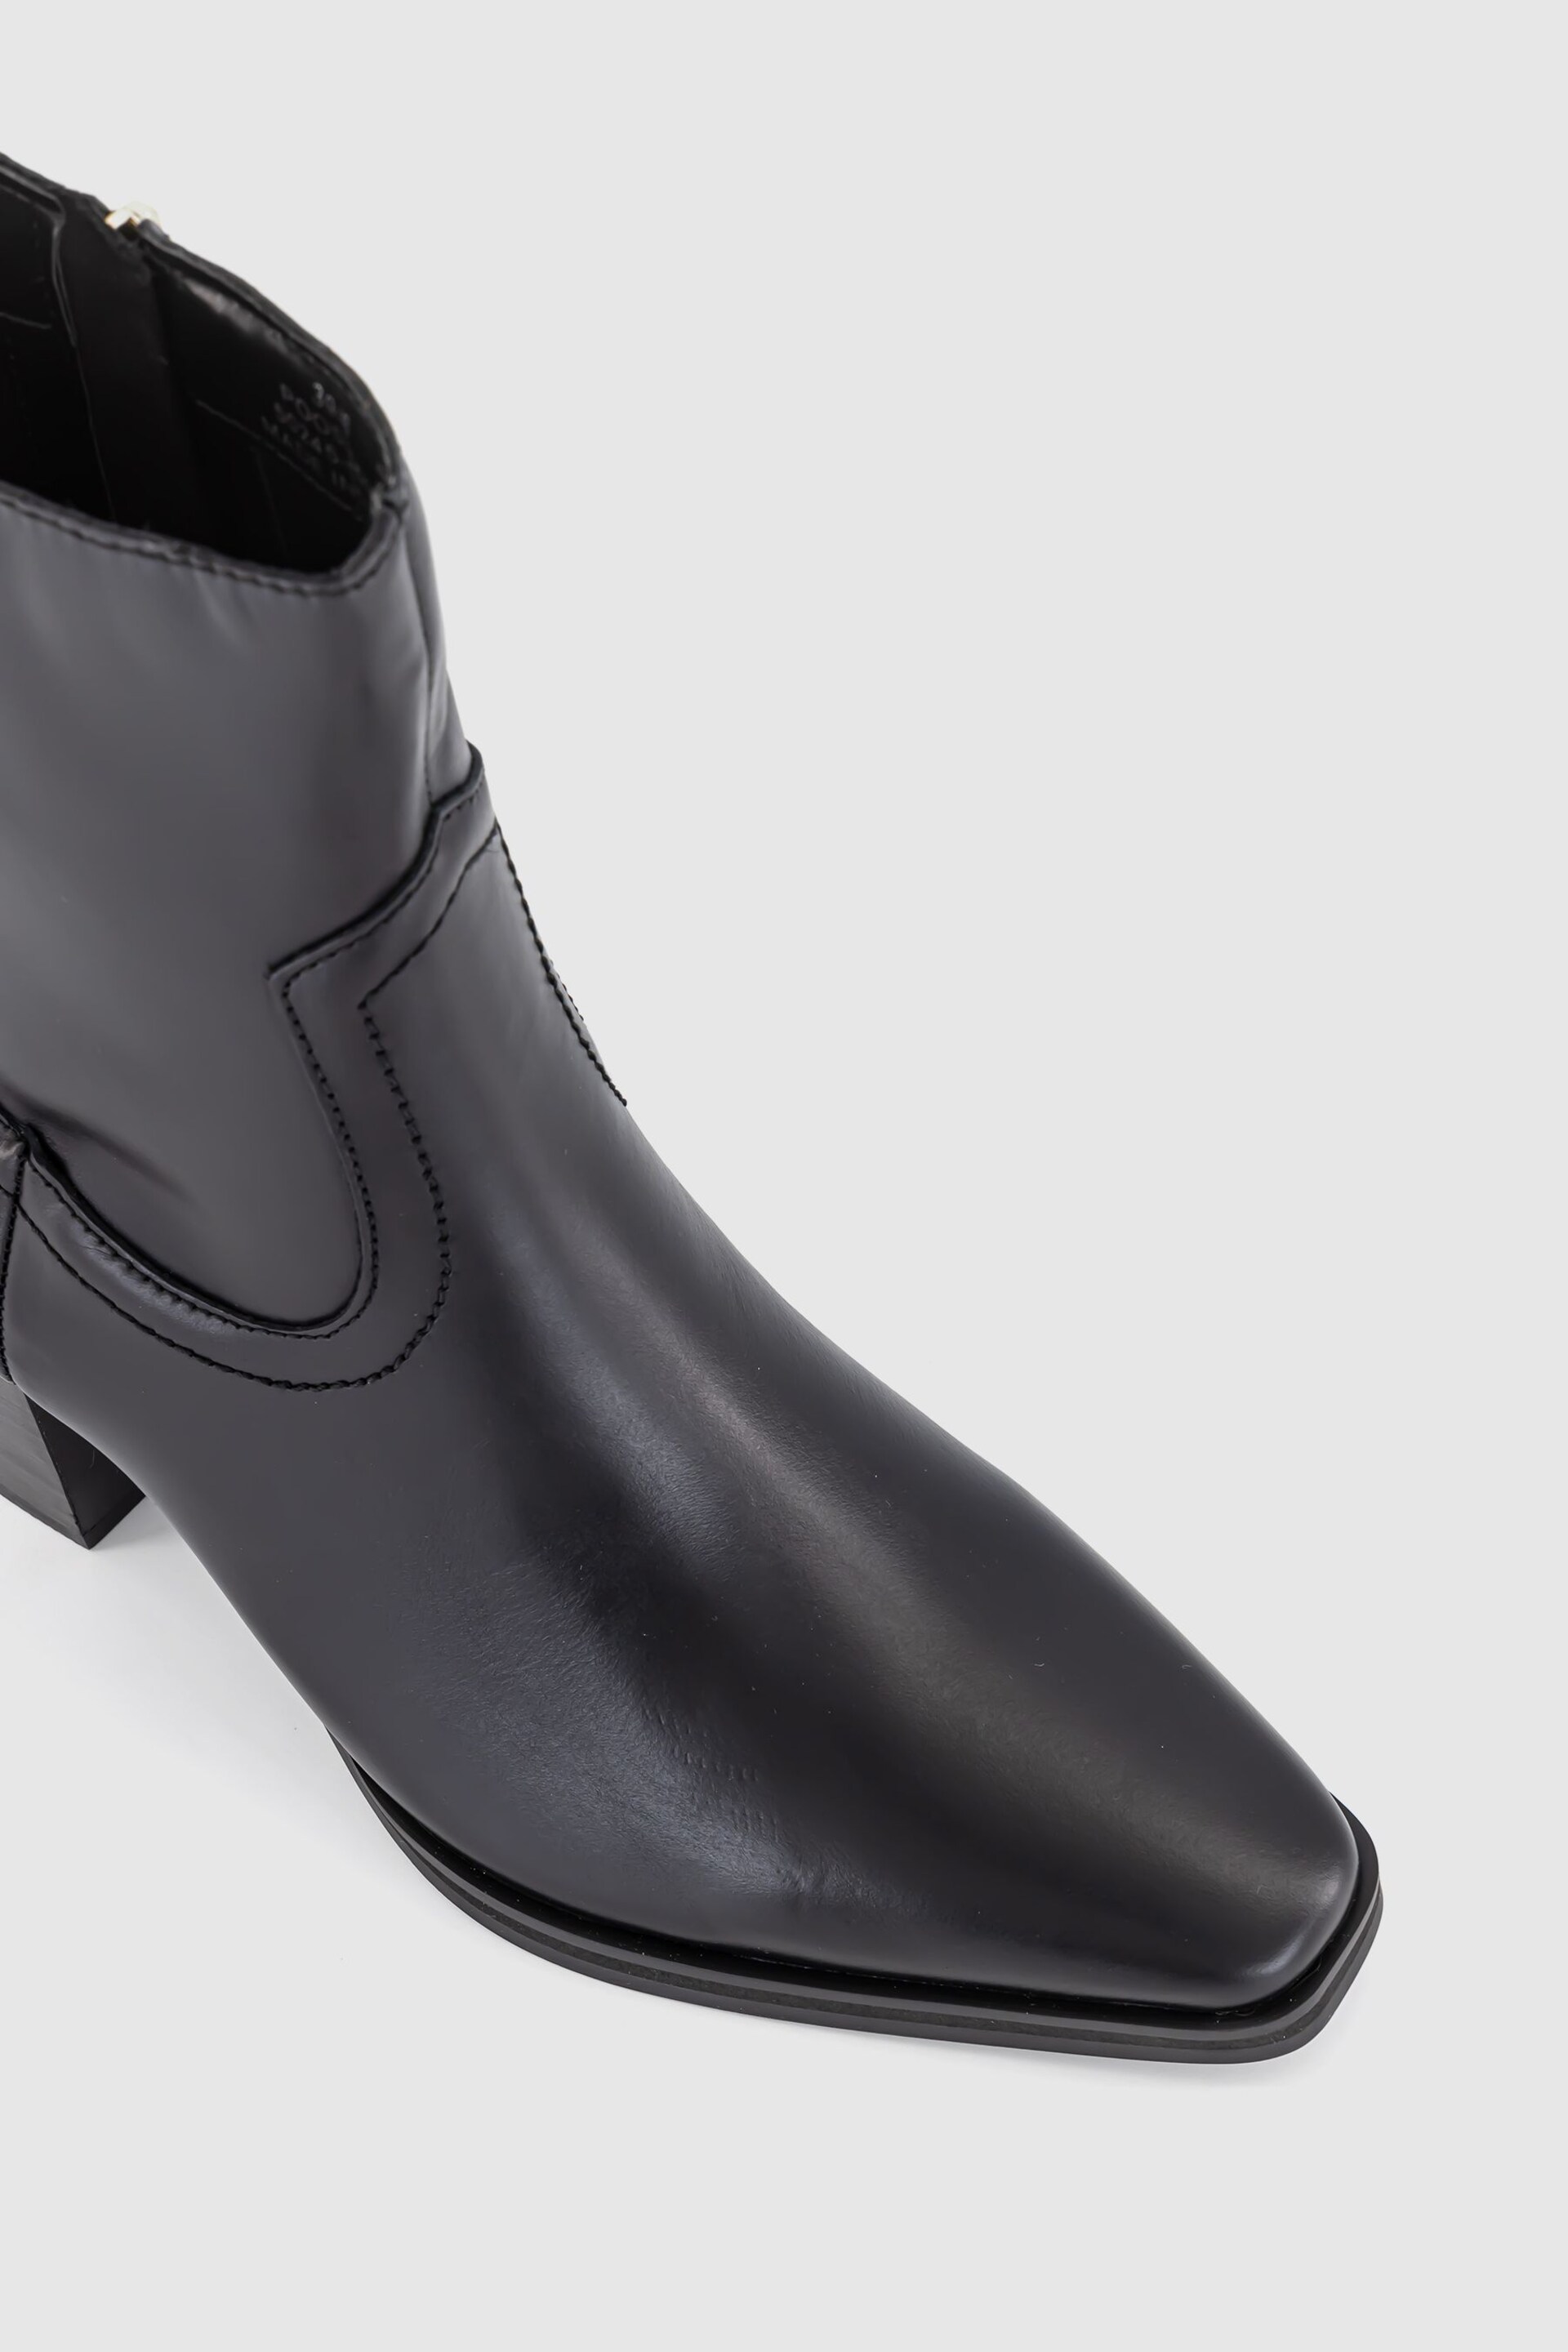 Office Black Leather Western Ankle Boots - Image 4 of 4